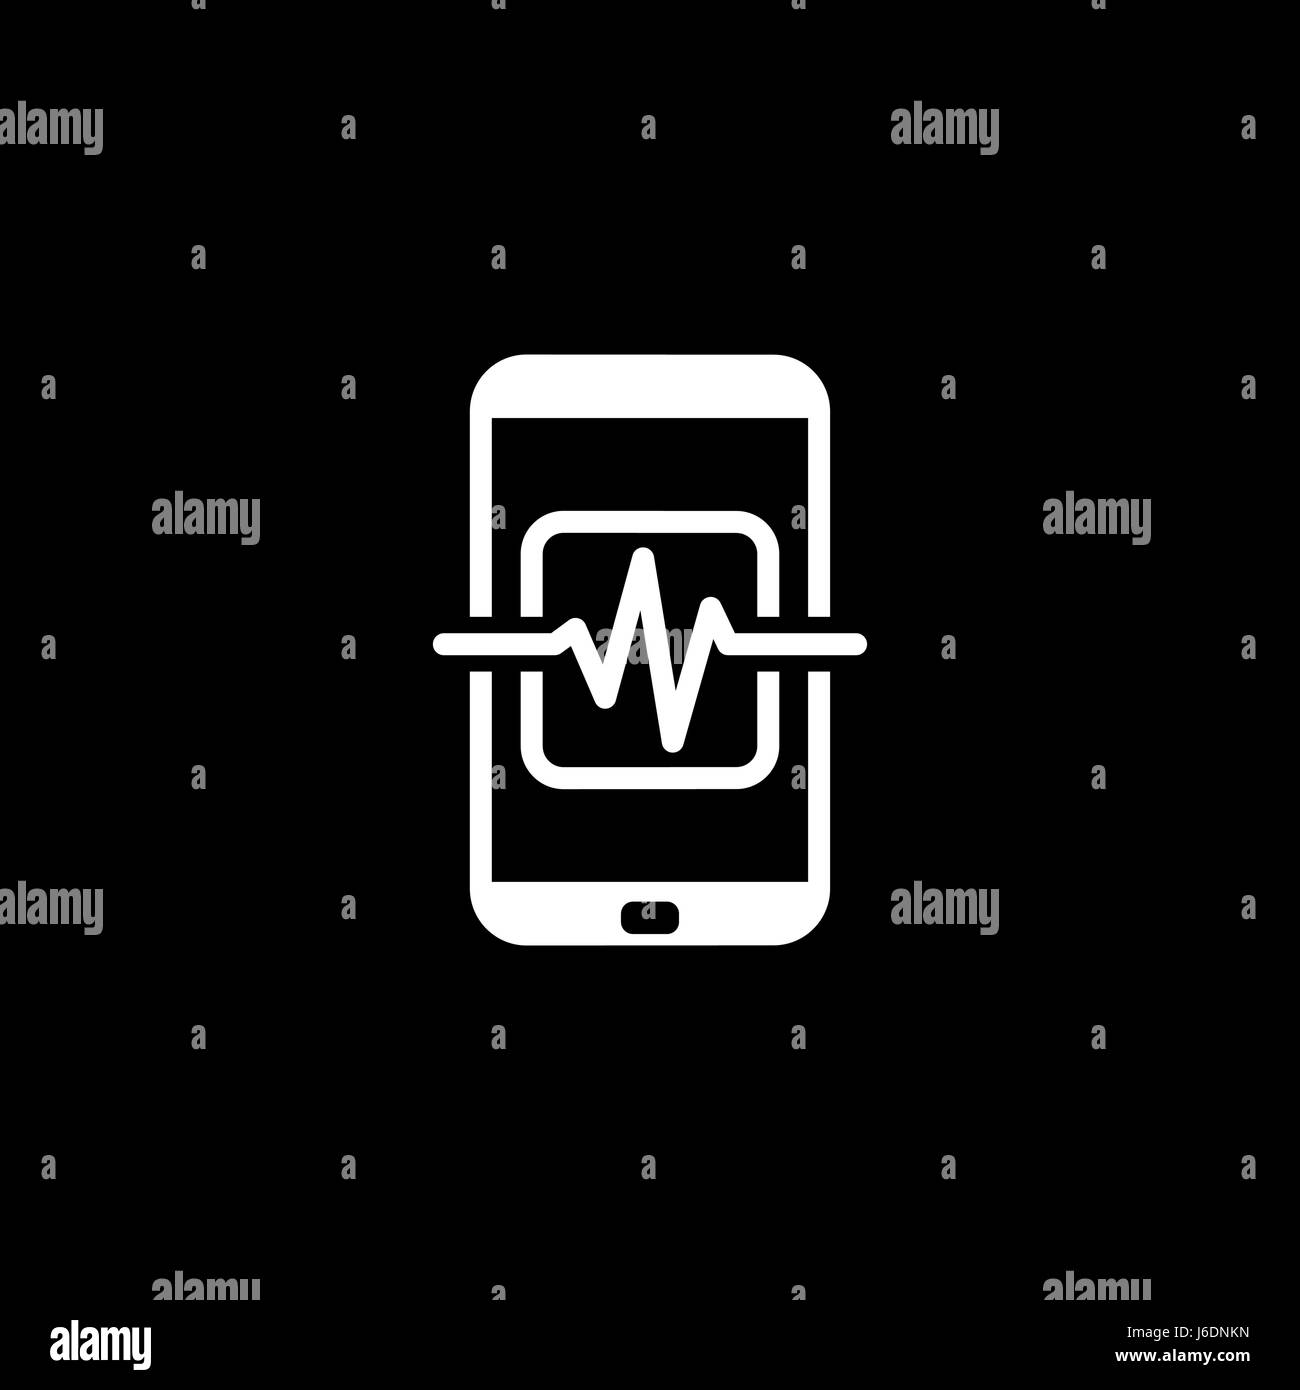 Mobile Medical Supervision Icon. Flat Design. Isolated Illustration. Stock Vector